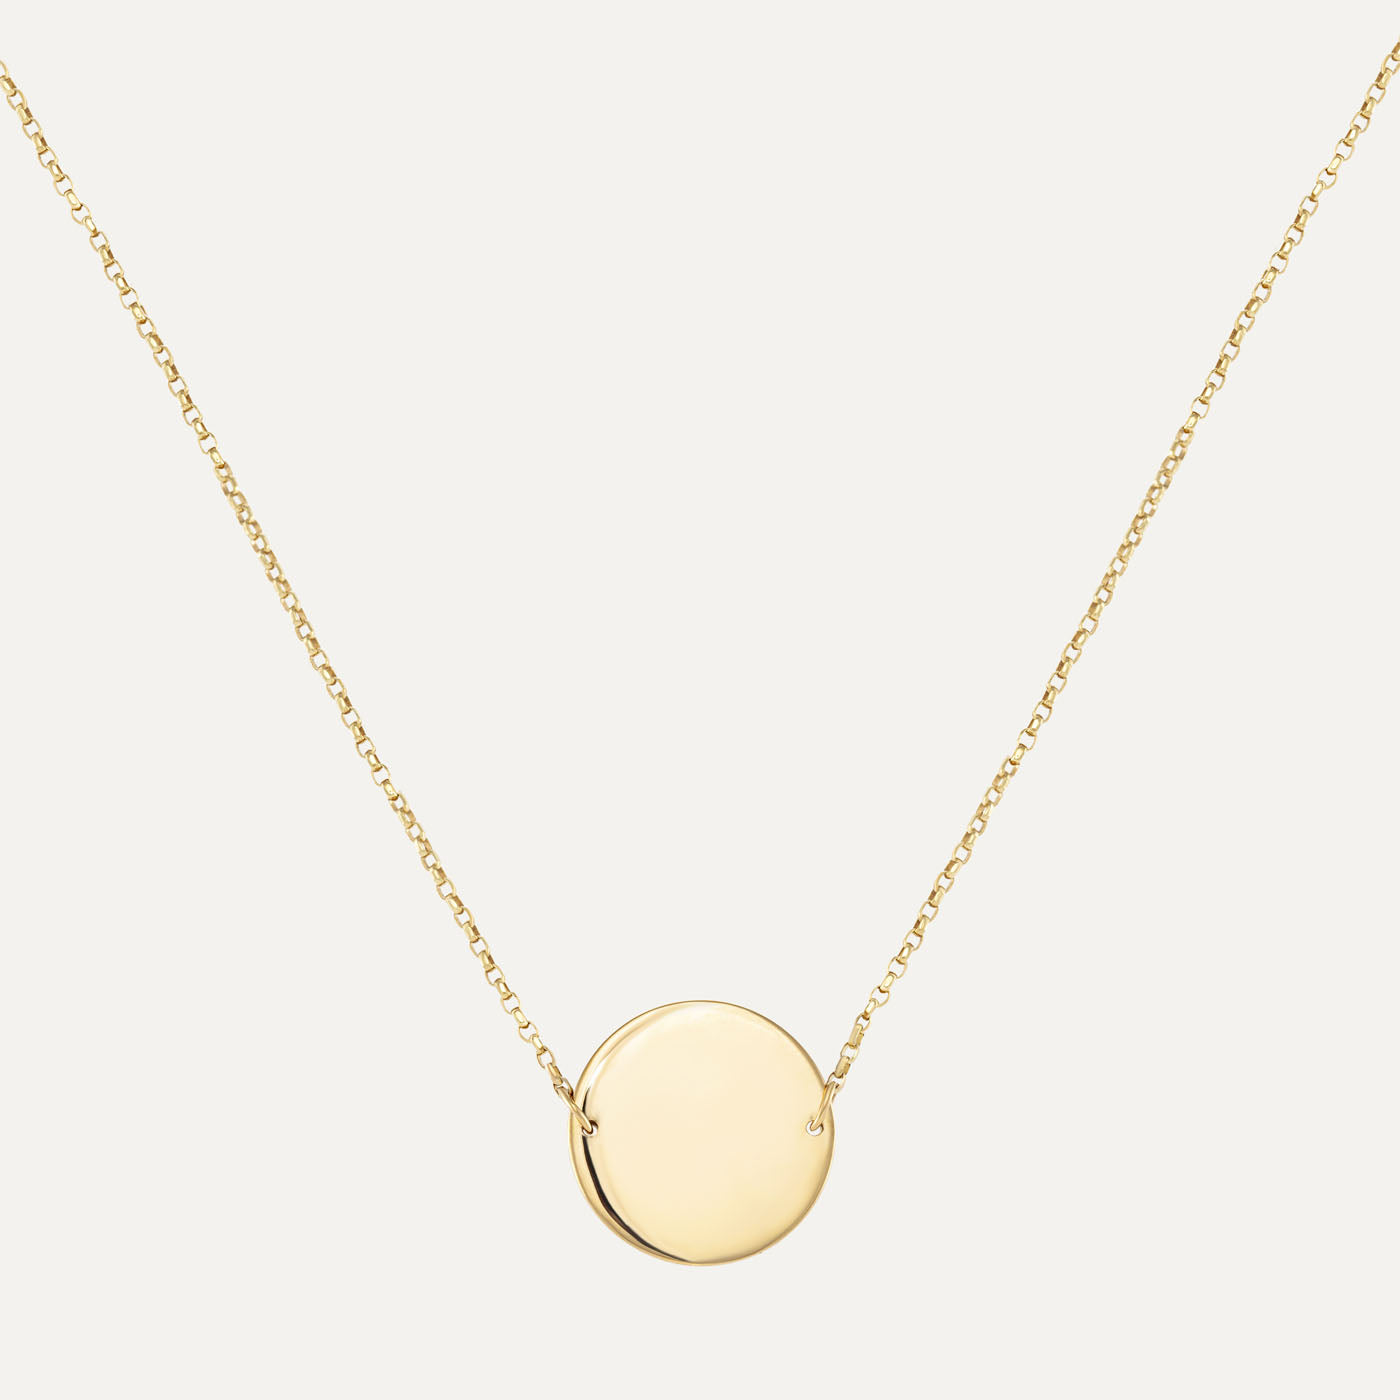 Solid Gold Interlocking Circle Necklace, a Handmade Hammered Textured 9ct  Solid Gold Hoop, Round Modern Gold Chain Necklace - Etsy